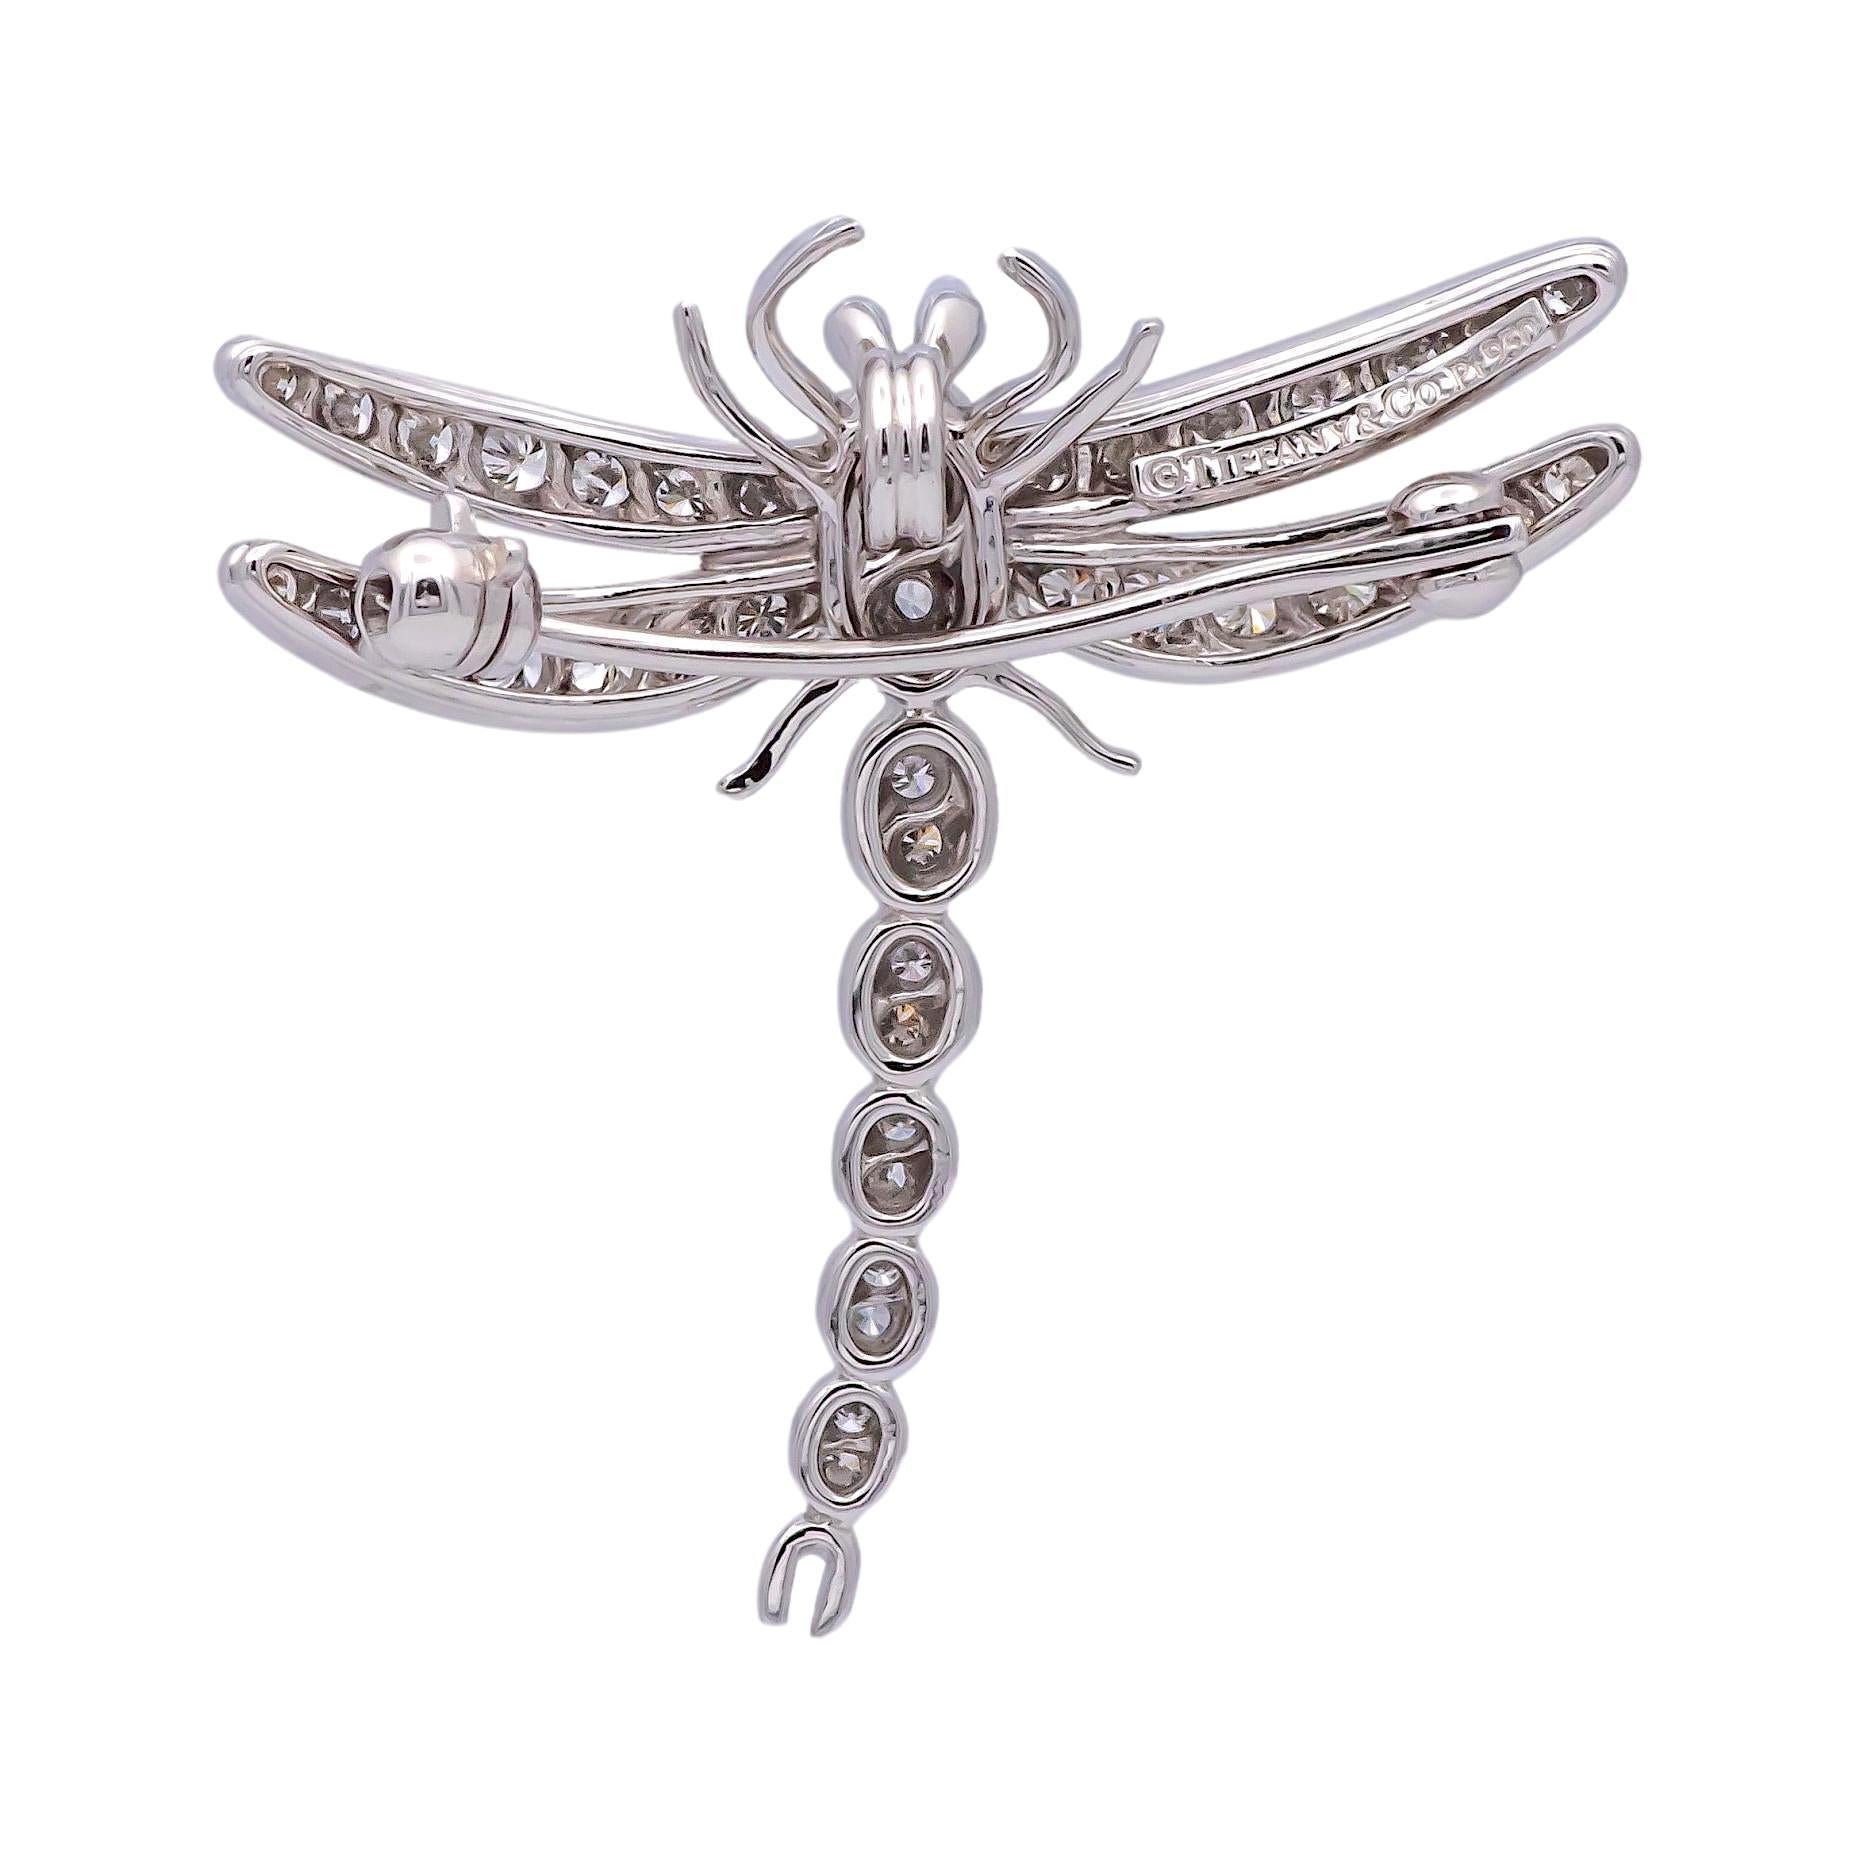 Vintage Tiffany & Co. brooch made around the 1990's finely crafted in platinum featuring prong set round brilliant cut diamonds weighing a total of .59 carats total weight approximately in a bright G color and fine VS1 quality. The dragonfly exudes